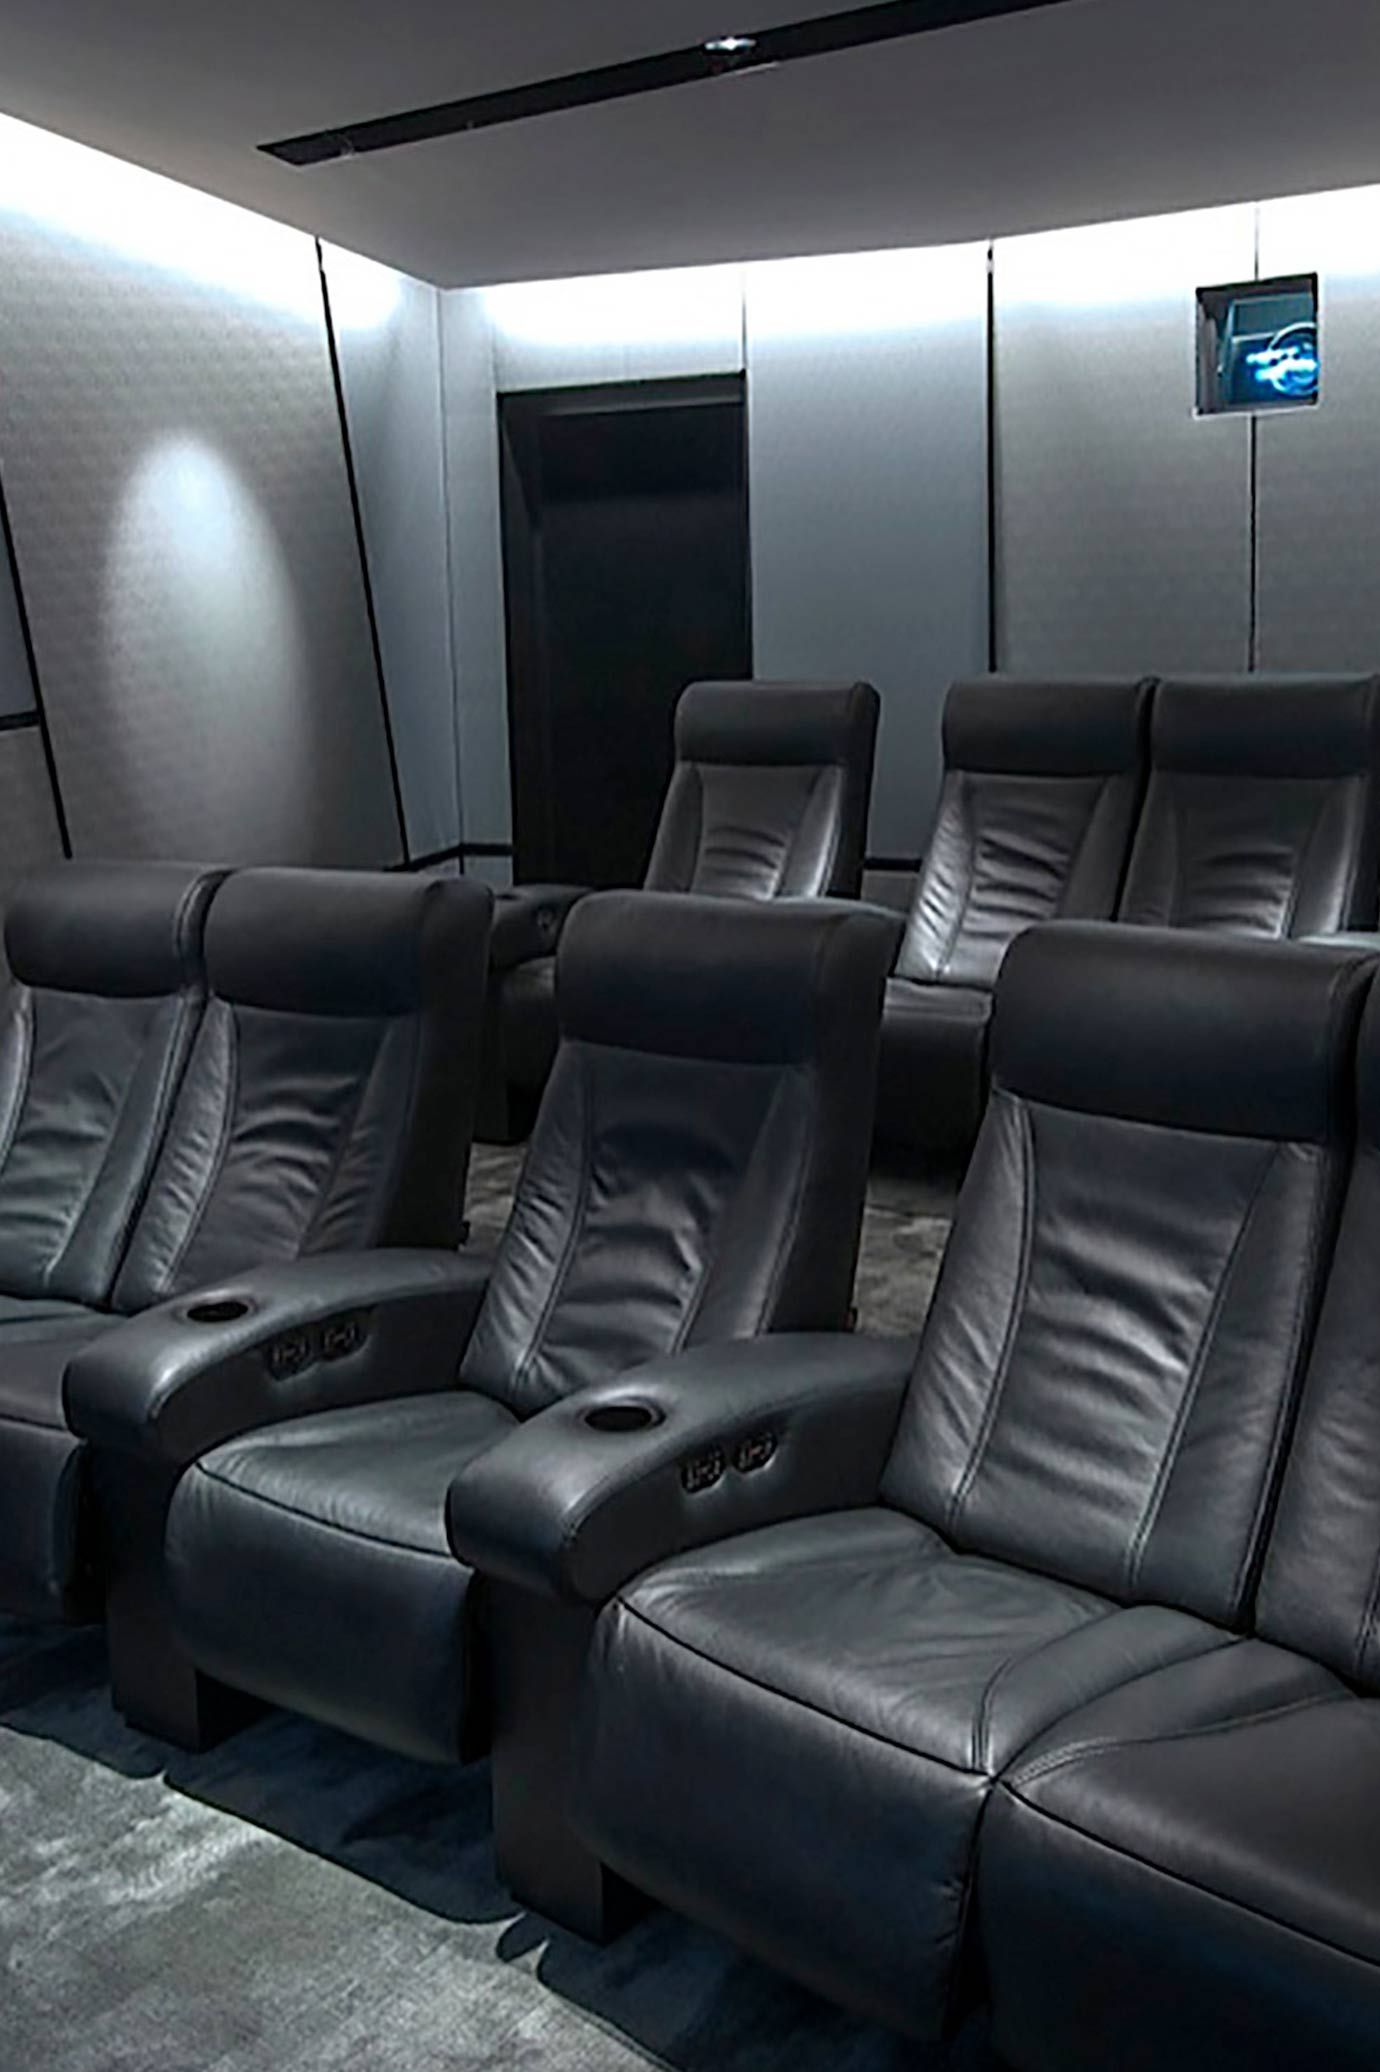 Black theater seating in a home theater